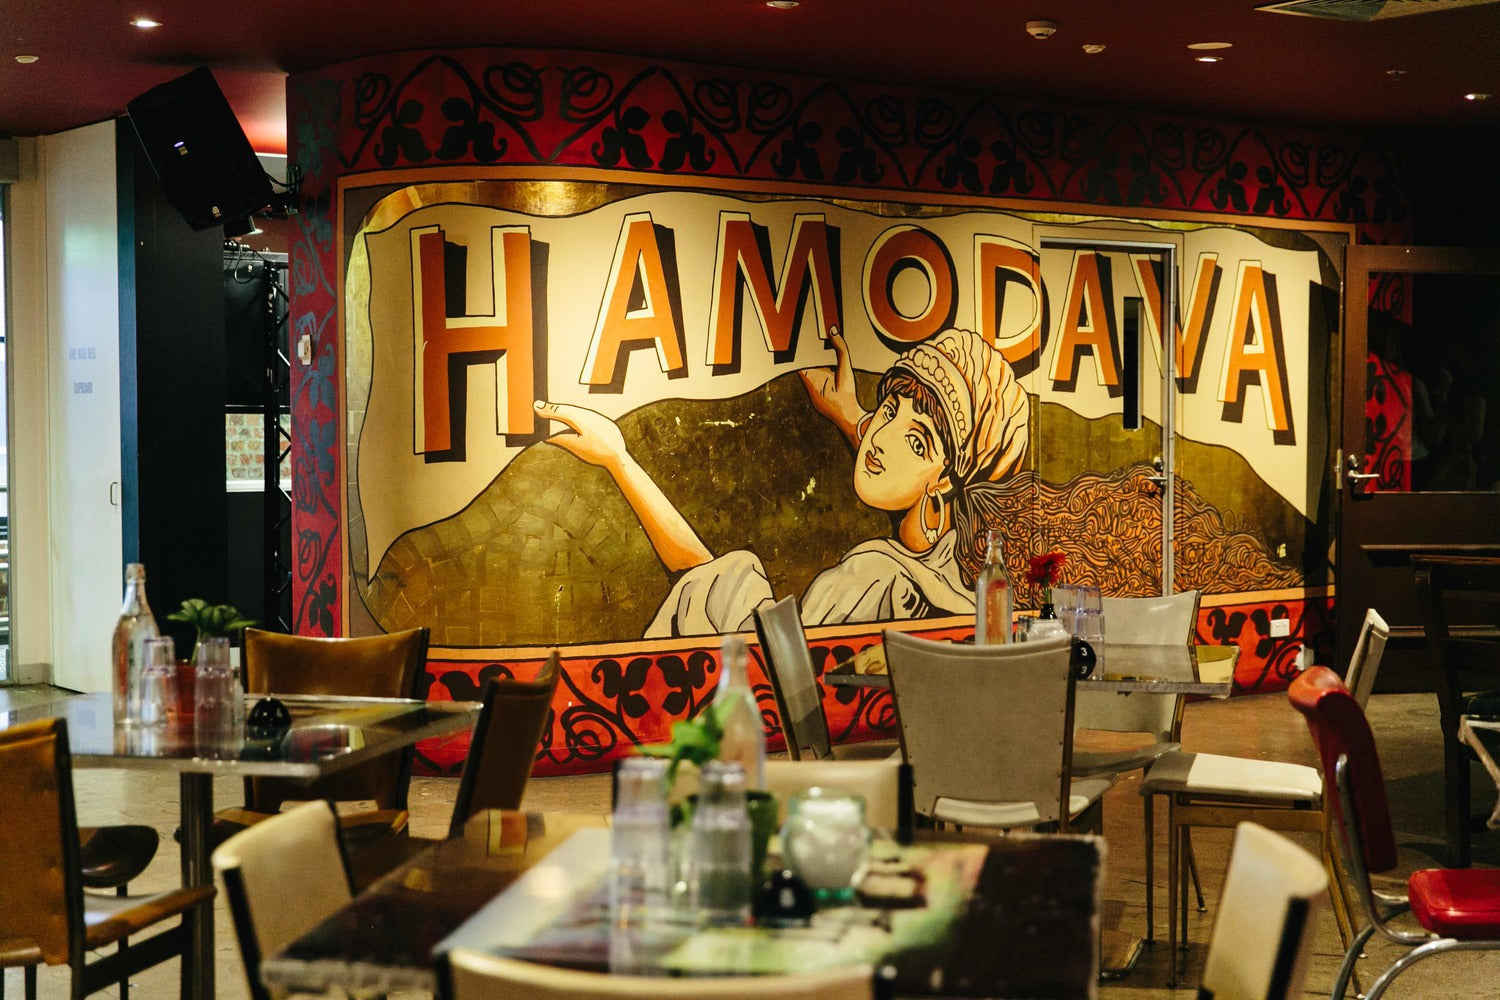 Image of the cafe hamodava. Chairs, tables and a beautiful wall art piece with the word Hamodava.